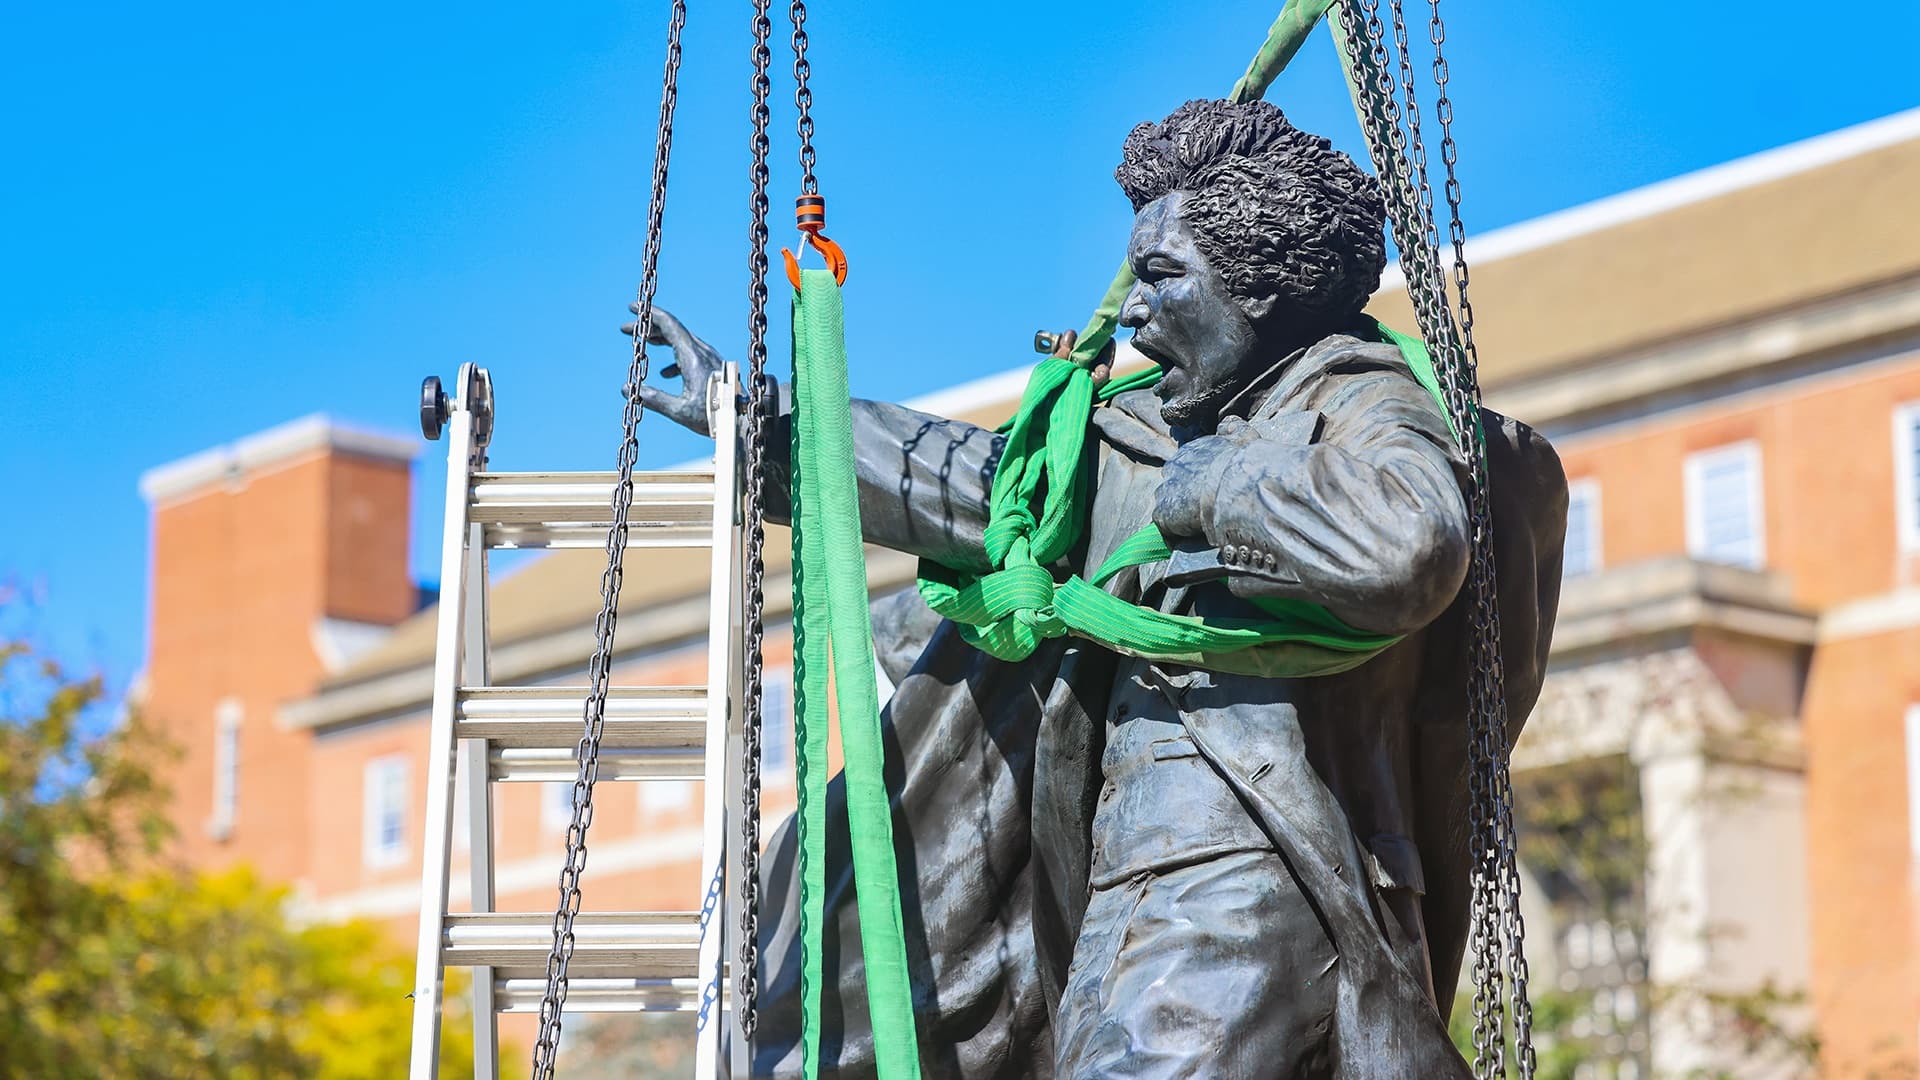 Frederick Douglass statue being removed from its pedestal for conservation